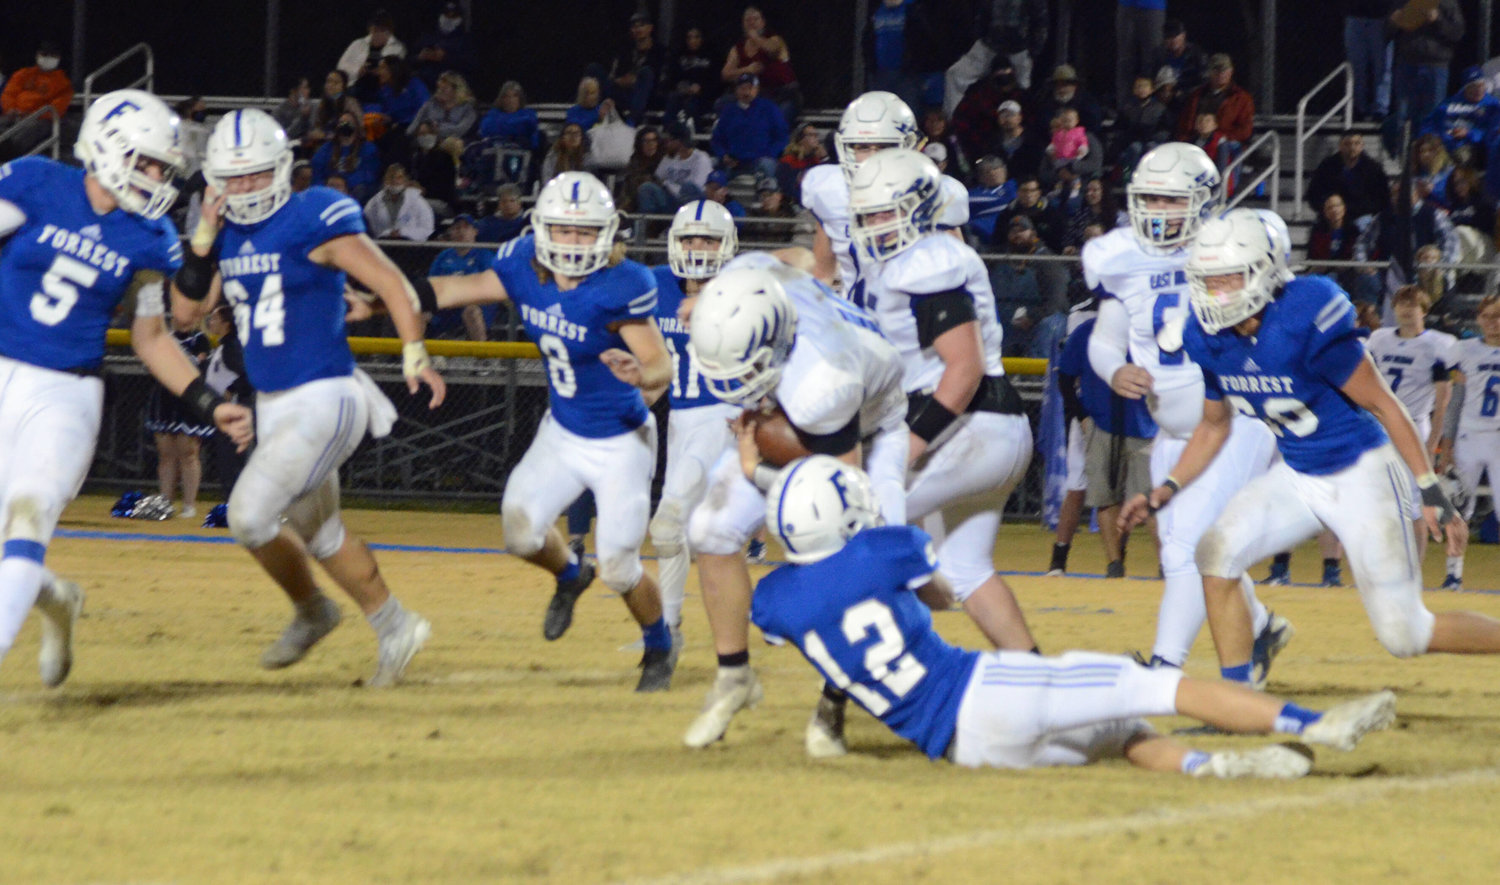 Senior Cole Perryman (12) comes up for the tackle on East Hickman running back Cooper Harris.